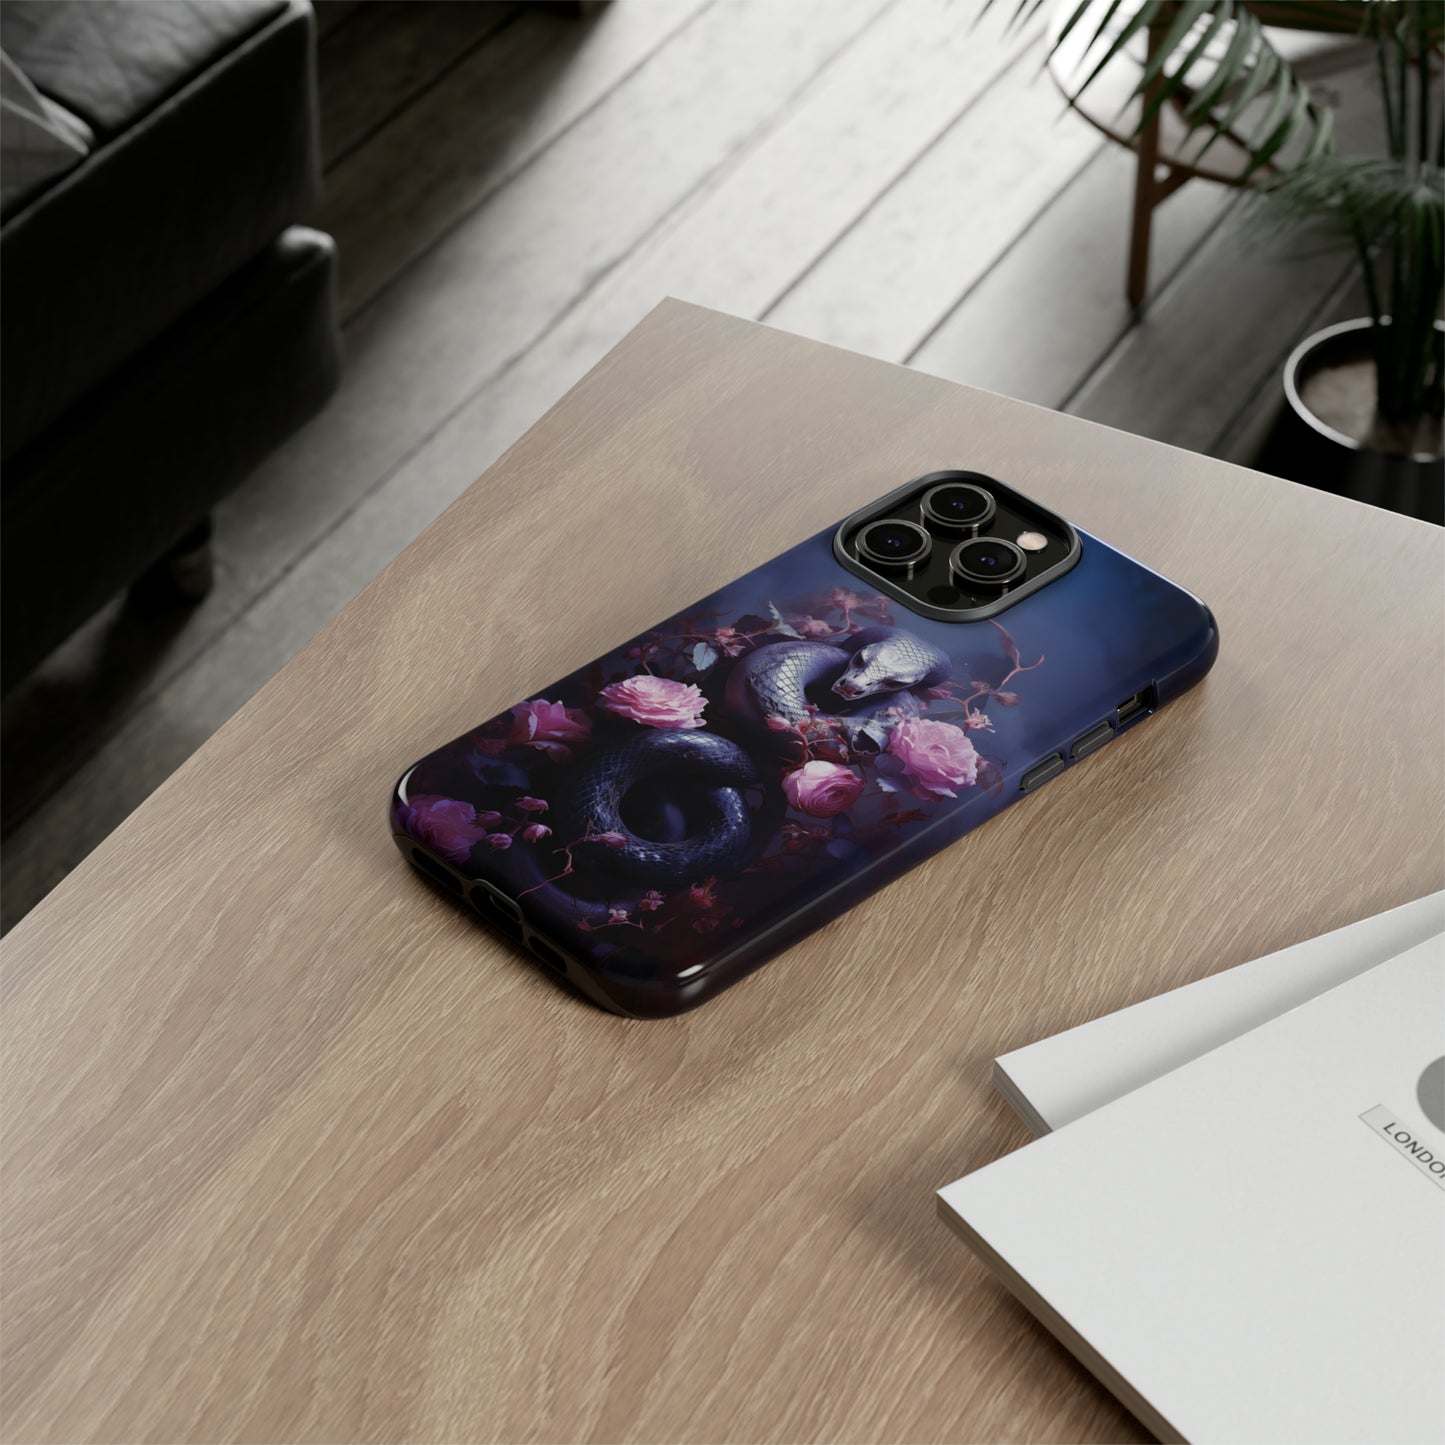 Scion of Chaos Snake - Phone Cases